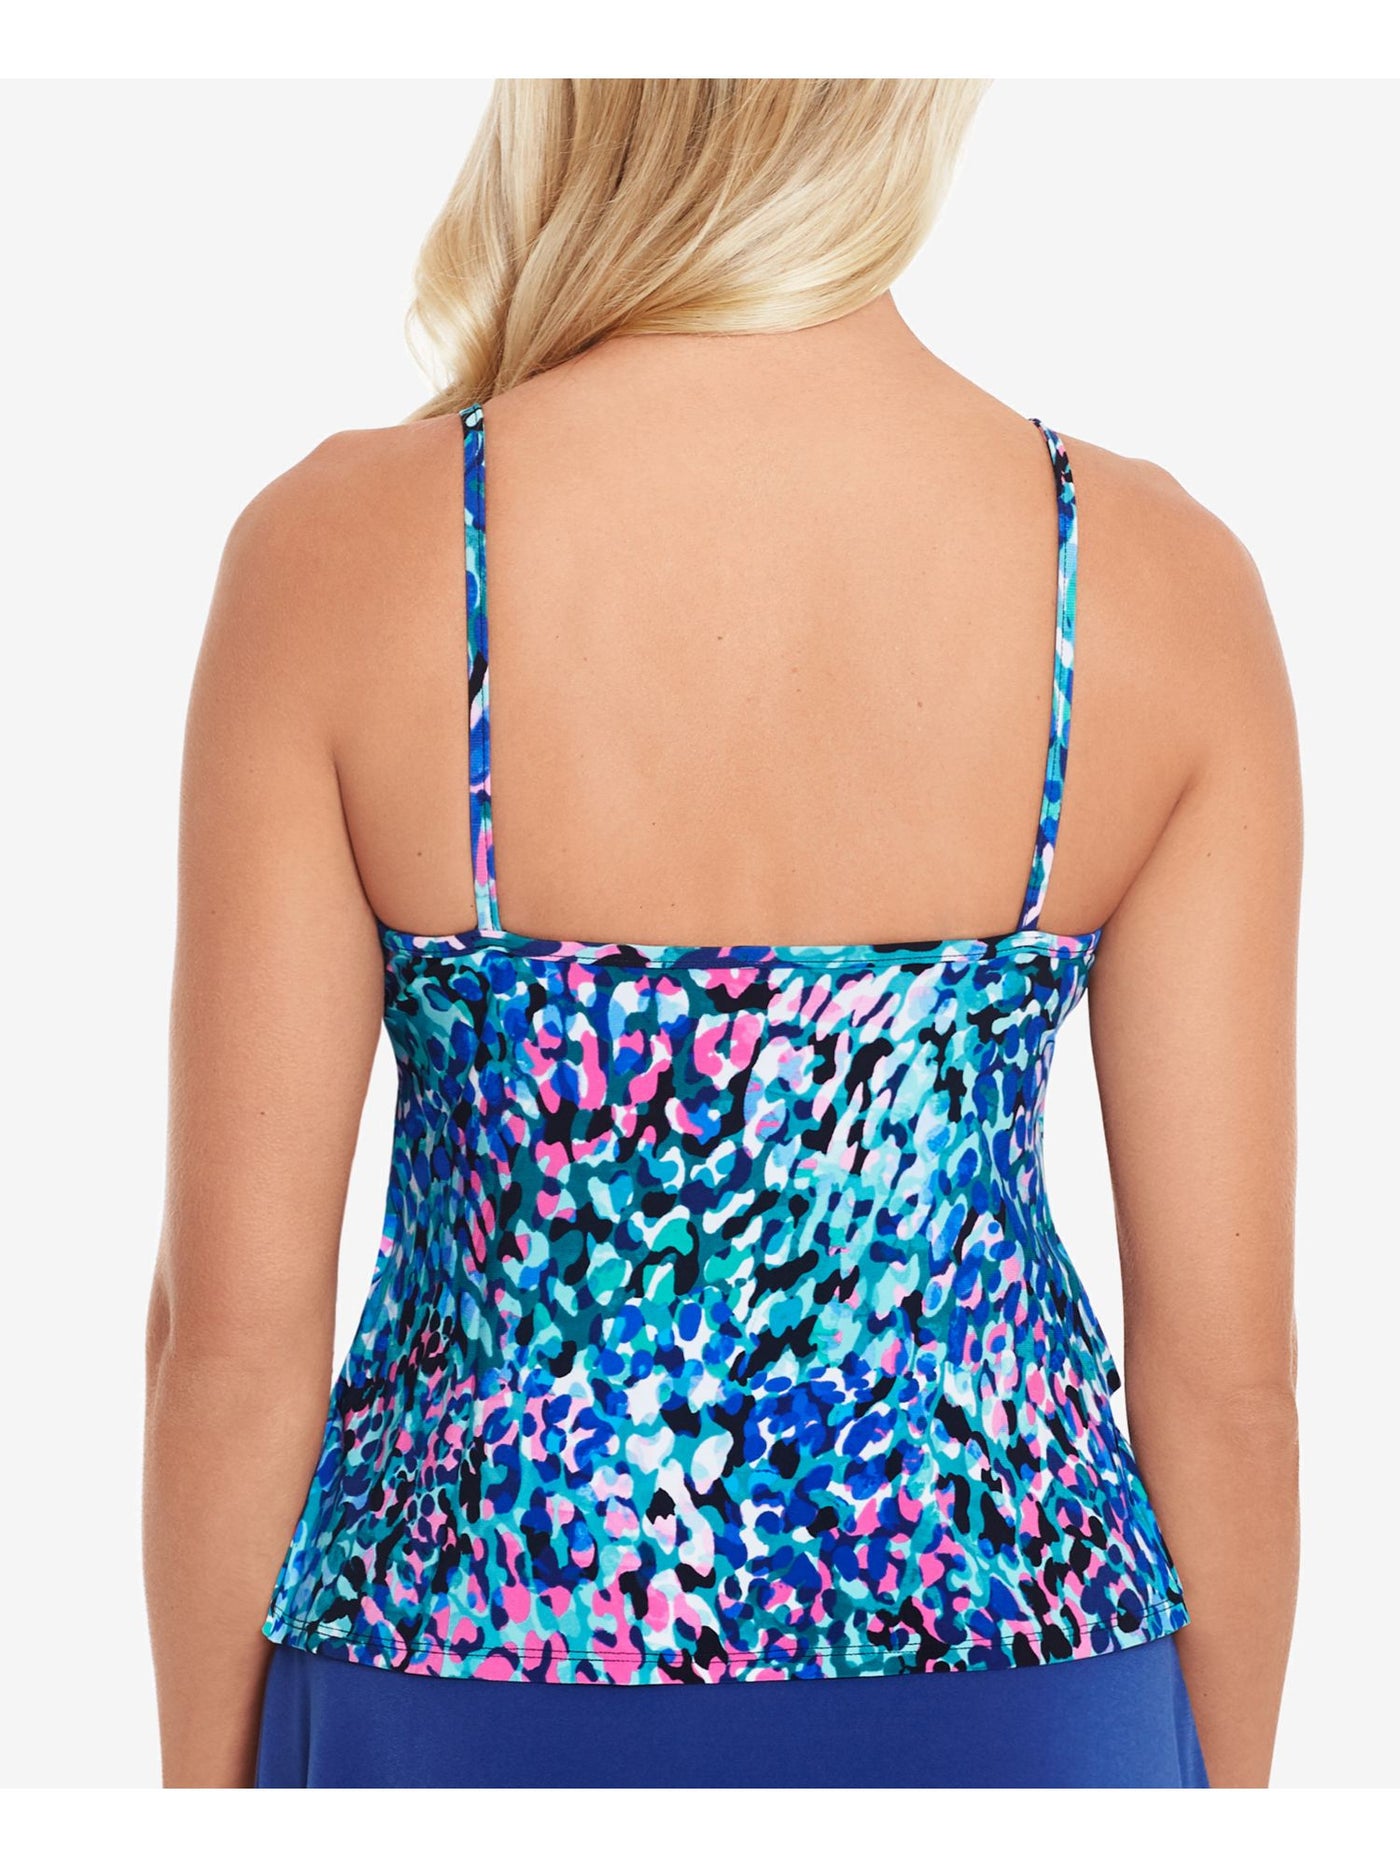 SWIM SOLUTIONS Women's Blue Printed Stretch Full Bust Support Lined Adjustable Tiered Tankini Swimsuit Top 8